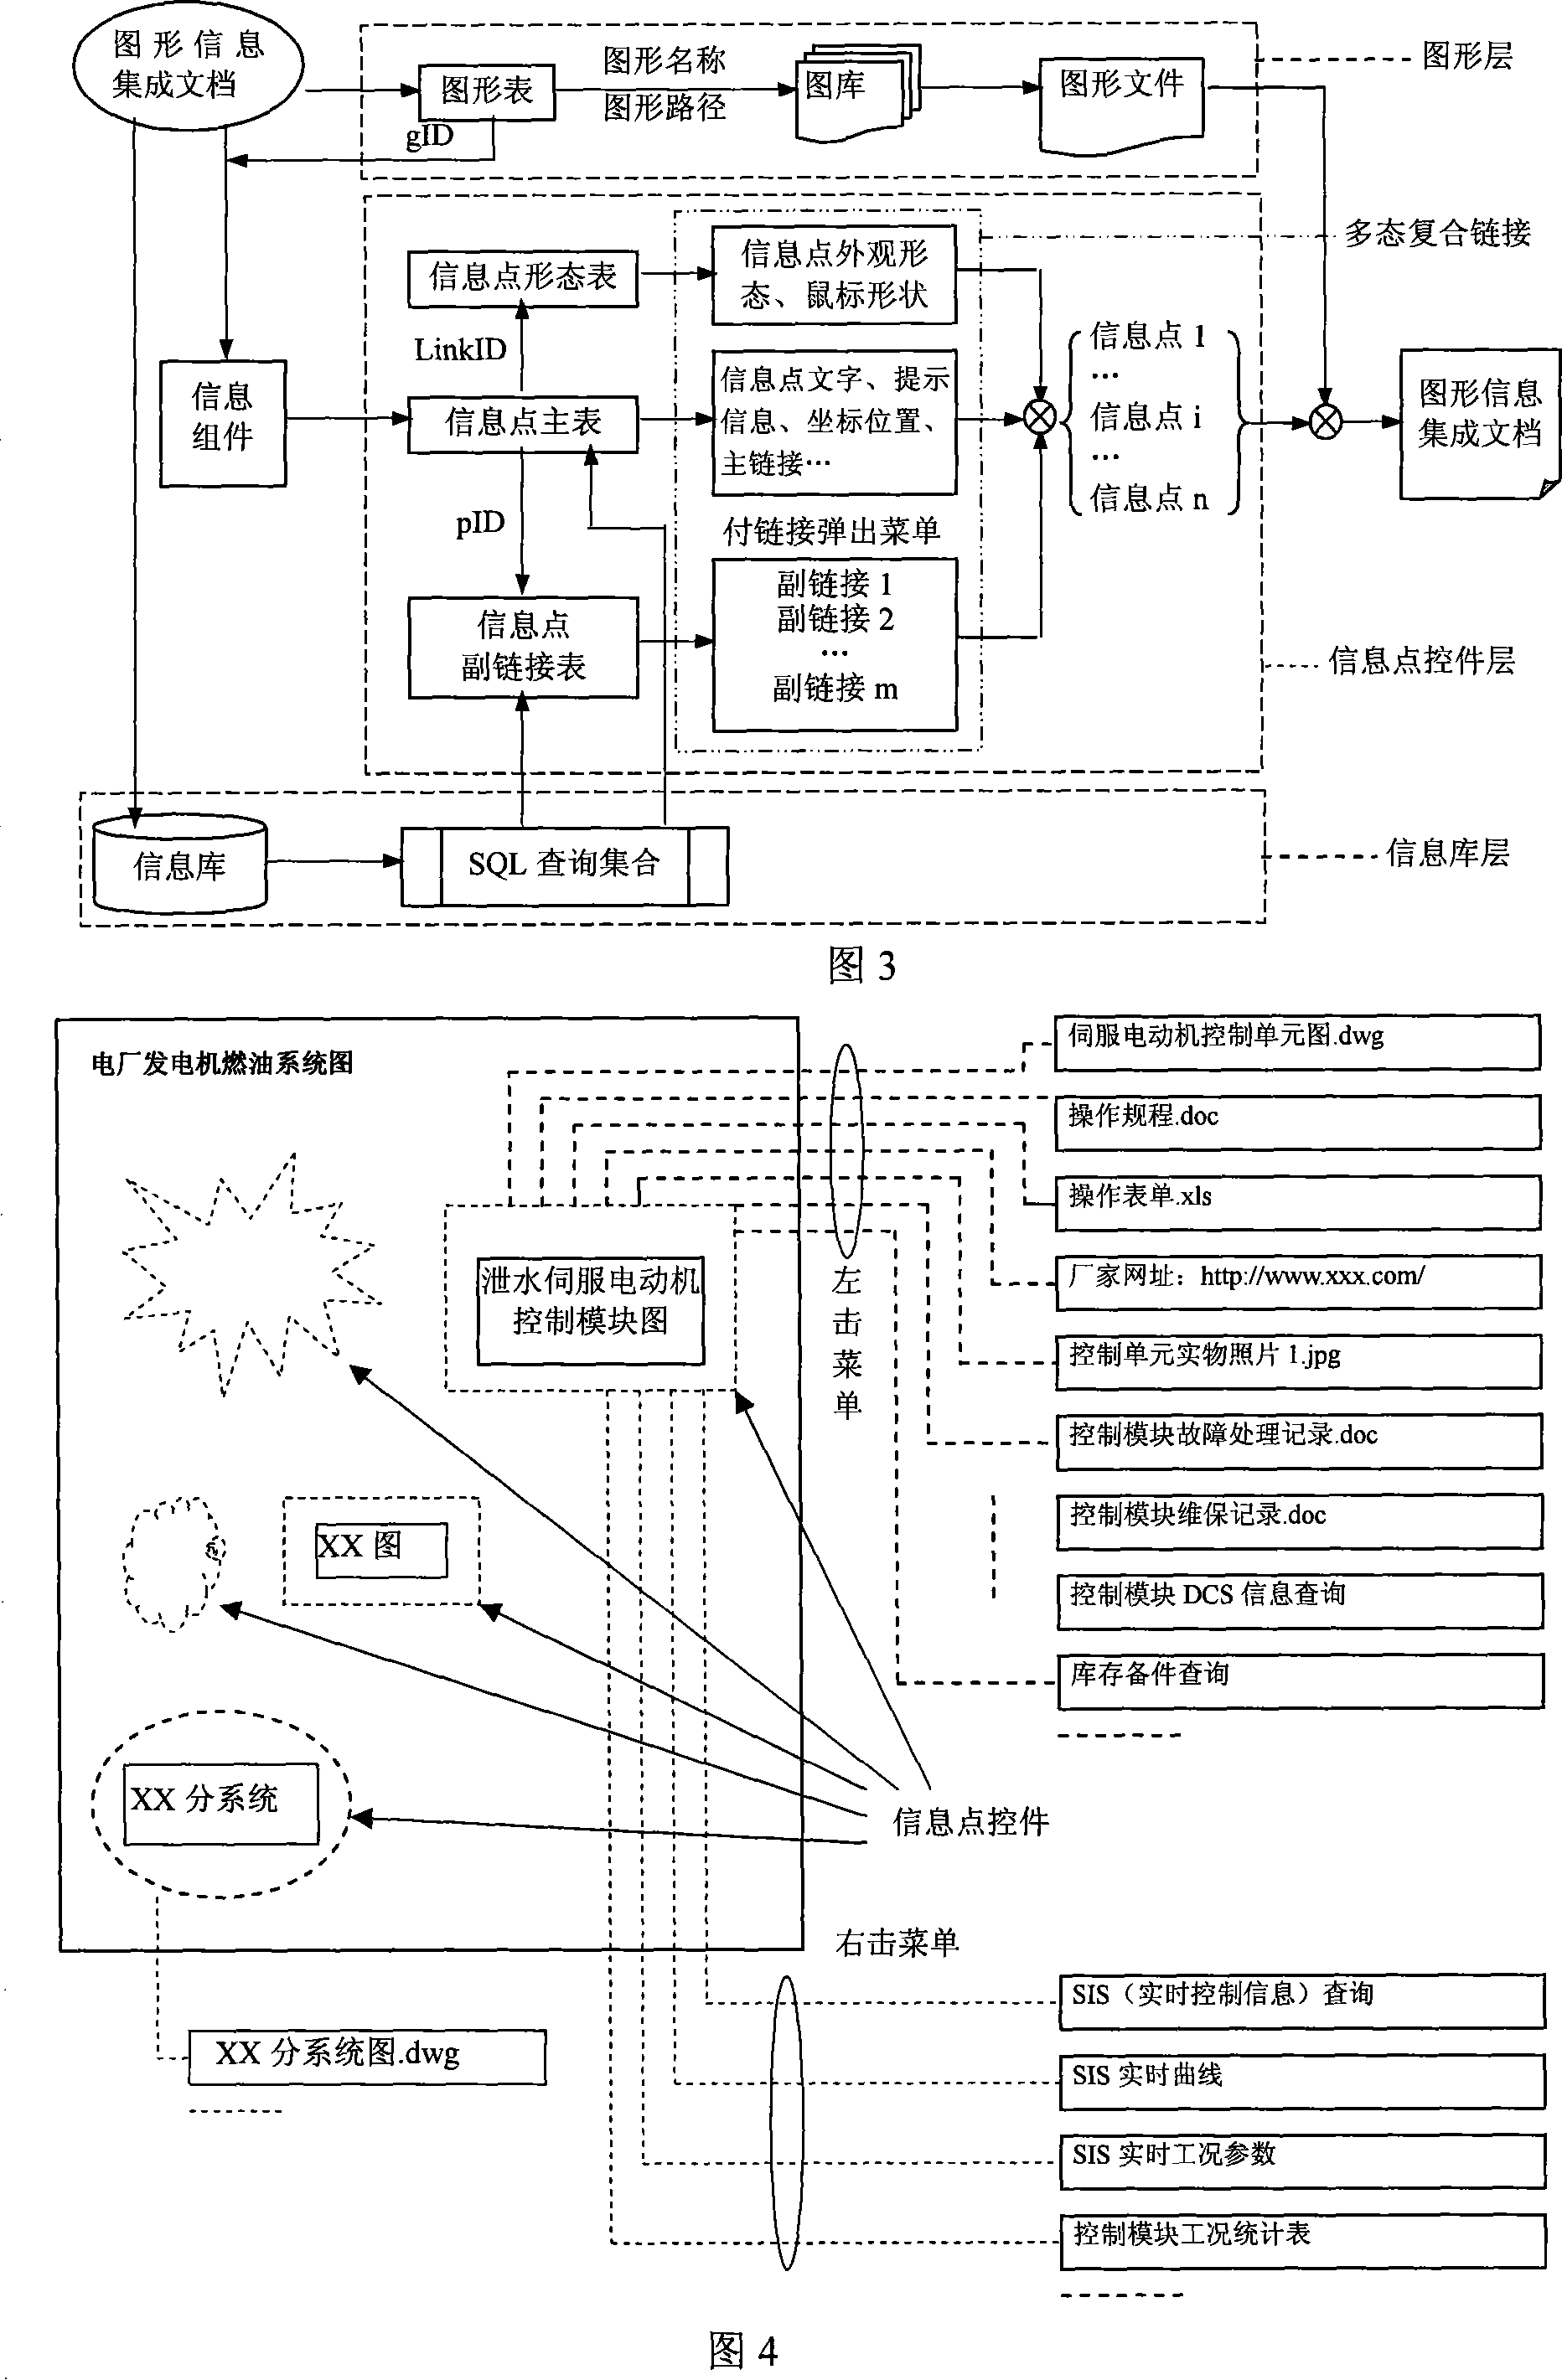 Multiple form complex linkage technology based on graph and image mode